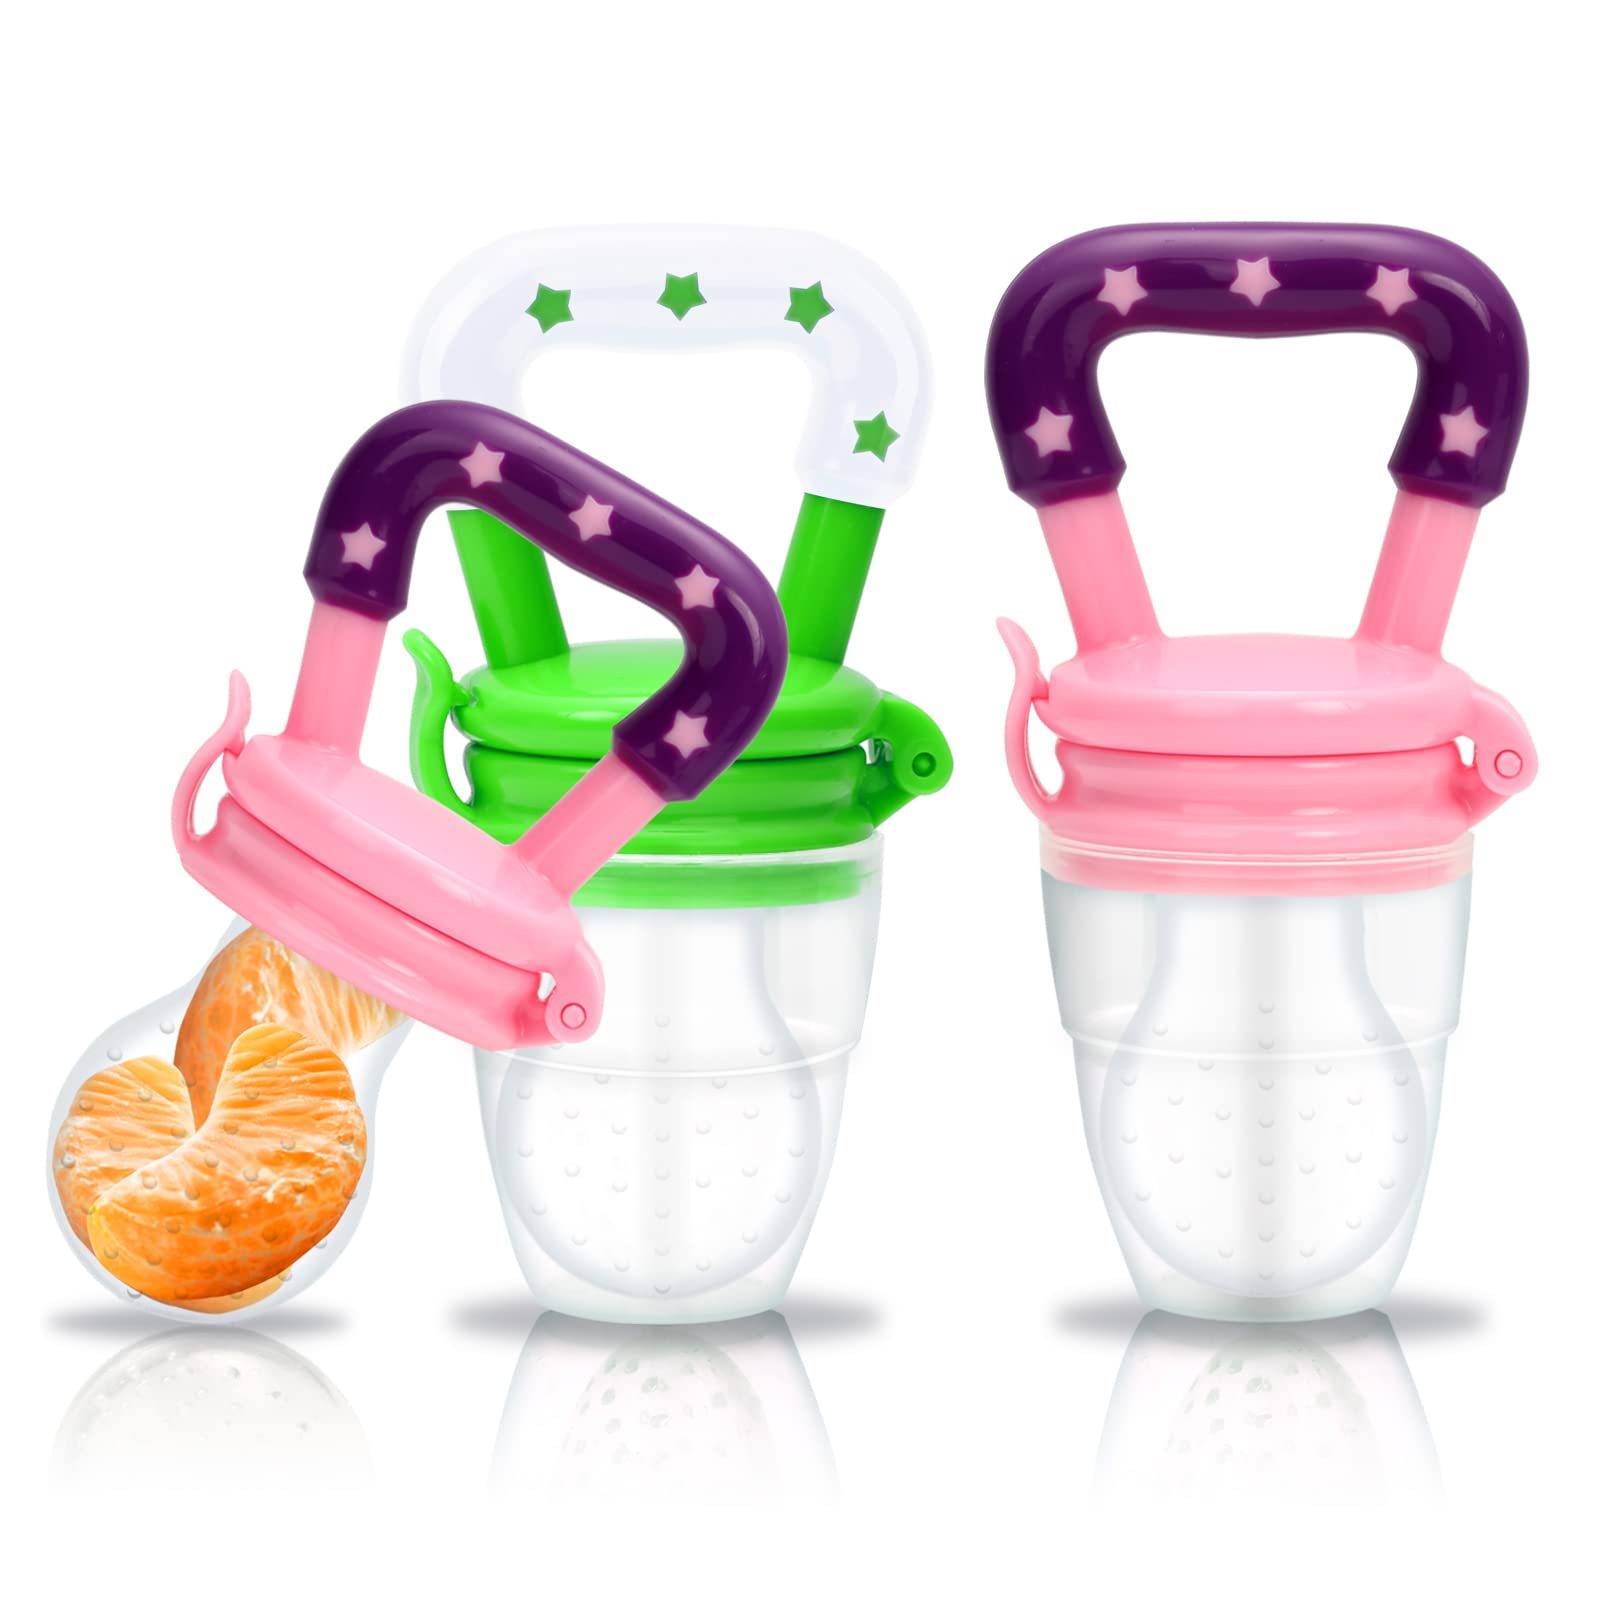 Baby Fruit Feeder,2Pcs Pacifier Food Feeder Dummy Weaning Dummies Set,Fresh Fruit Feeder Baby SuppliesToys Pacifiers with Teething Dummy Used for Weaning & Soothing,Soft Silicone for Babies Infant